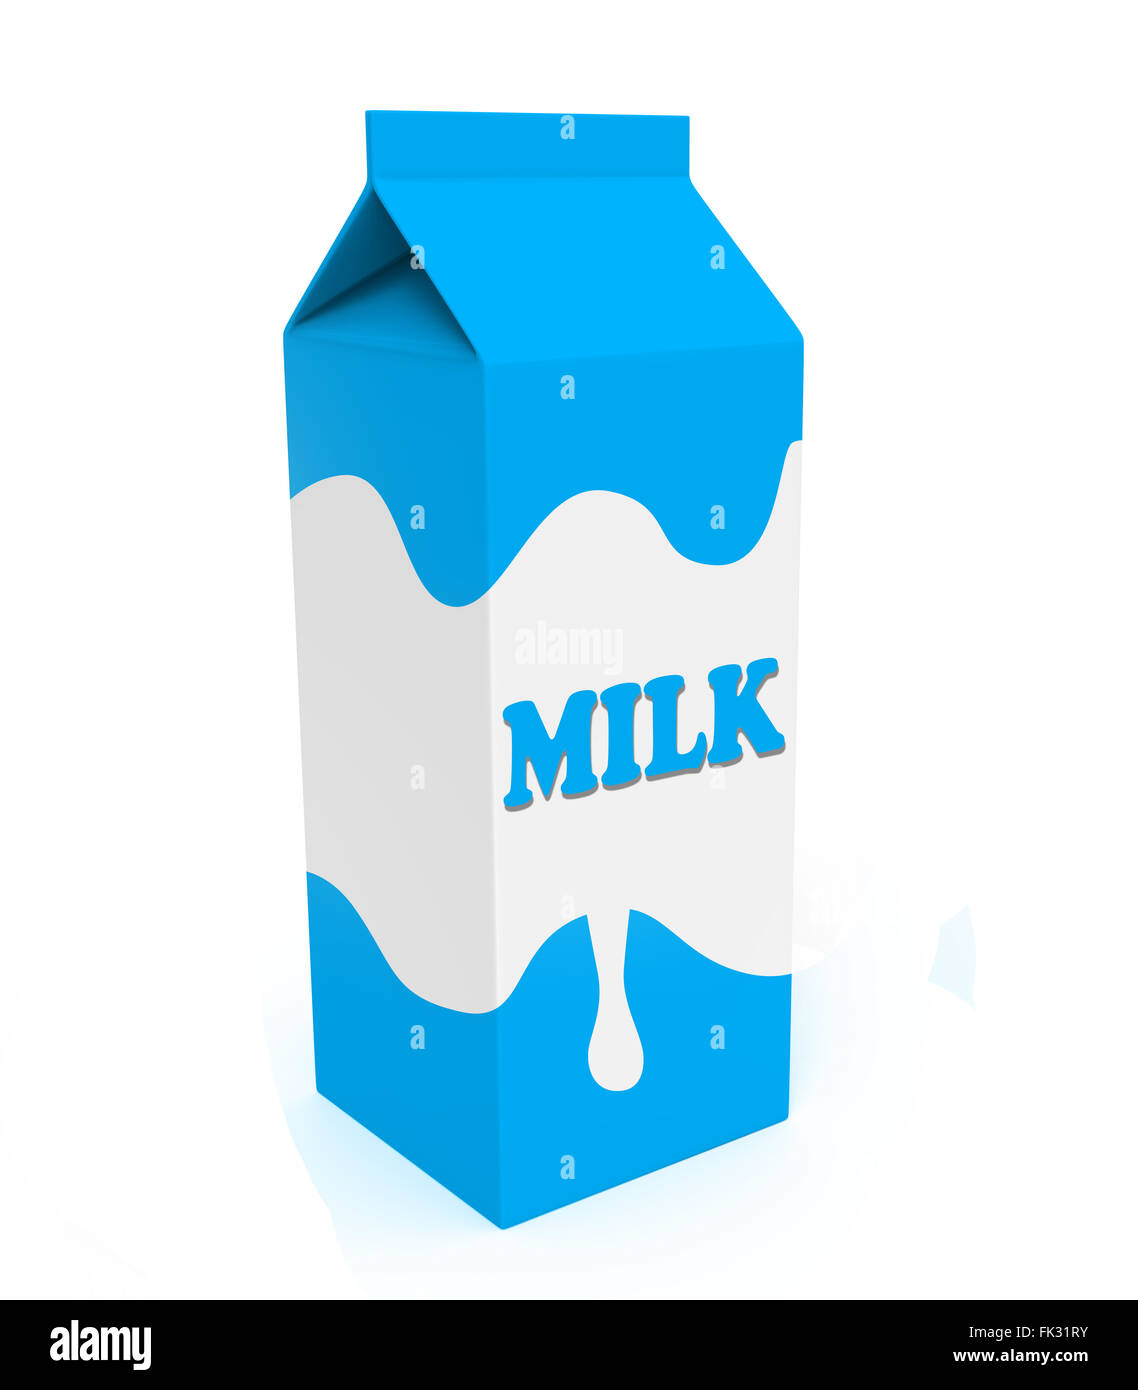 https://c8.alamy.com/comp/FK31RY/blue-and-white-milk-carton-box-isolated-on-a-white-background-FK31RY.jpg